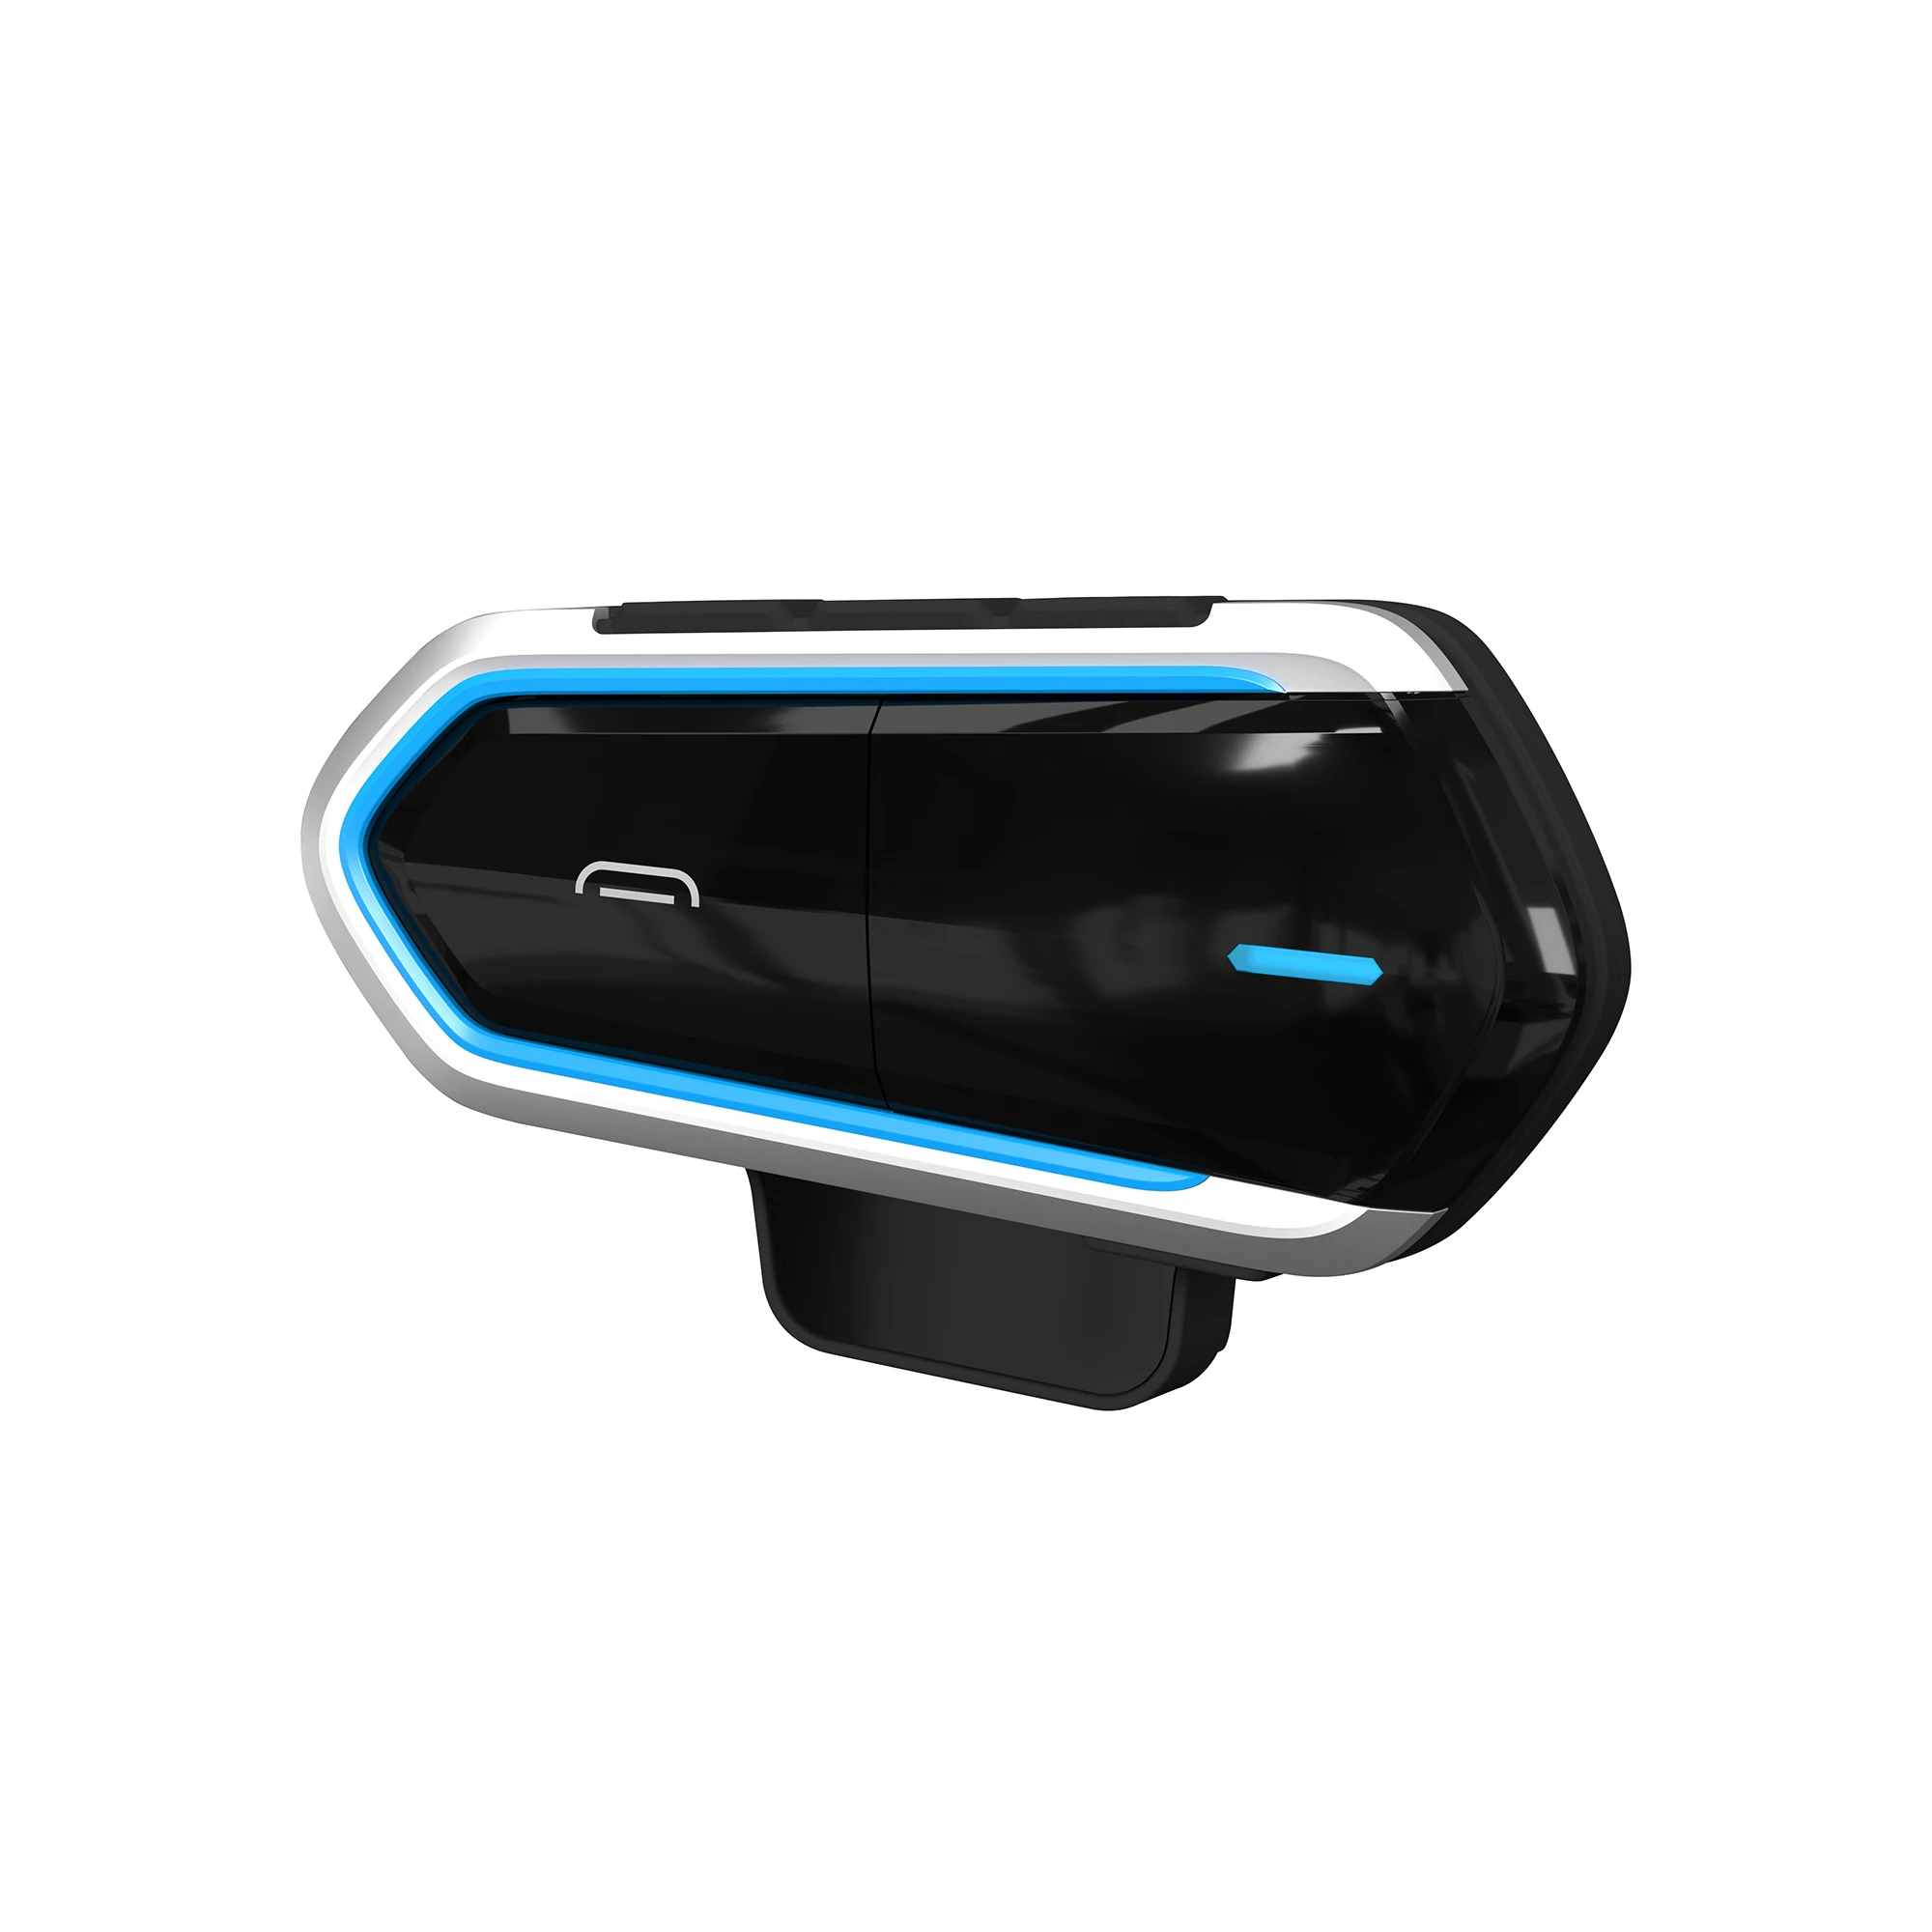 controller galop Gewoon doen Wholesale Hot Selling Motorcycles With Fm Wireless Bt Helmet Bluetooth  Headset For Riders - Buy Bt Headset For Riders,Wireless Bt Headset,Helmet  Bt Headset Product on Alibaba.com